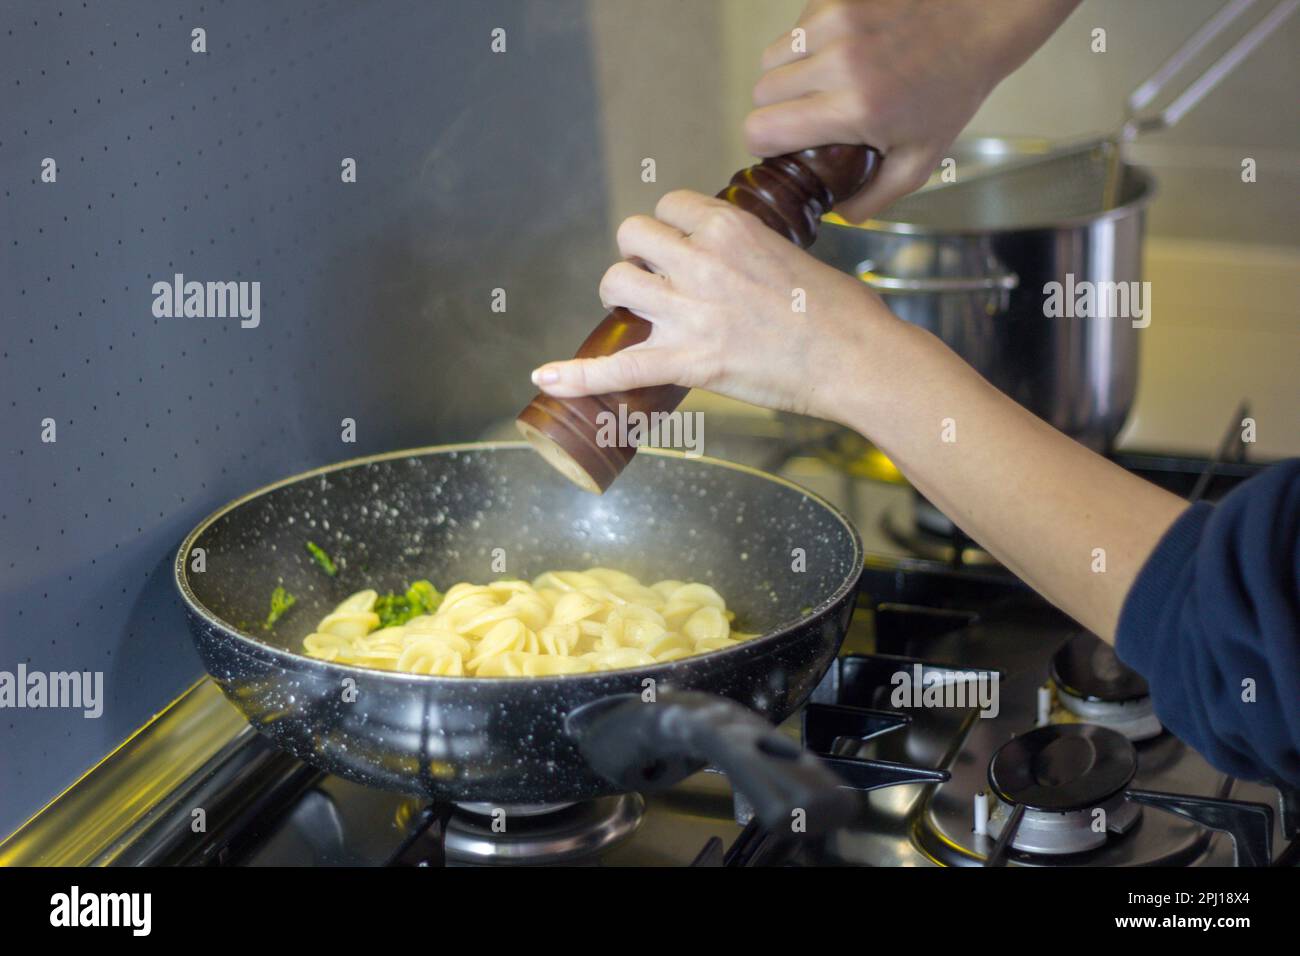 Image of a woman's hands seasoning freshly cooked pasta in a pan with a pepper mill. Italian culinary tradition. Stock Photo